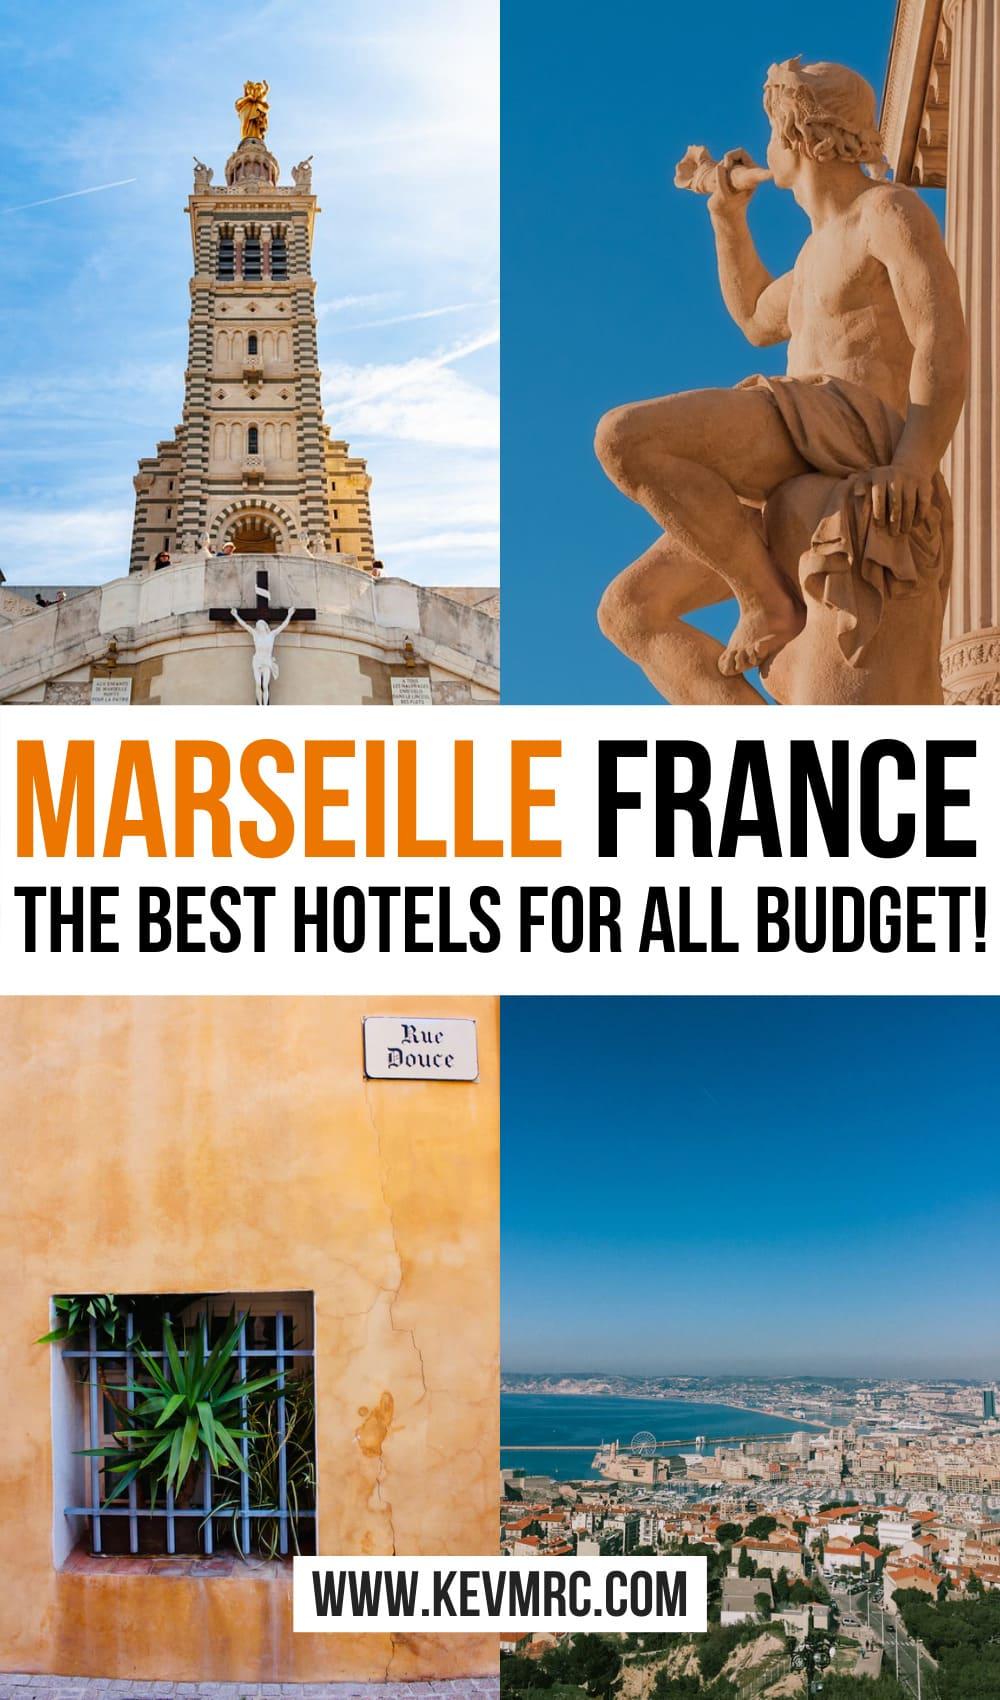 Marseille is France's 2nd biggest city and is twice Paris size. With that being said, finding the best accommodation in such a huge town can be tricky. That's exactly why I've wrote this post: I've made this list of the 23 best hotels in Marseille France. hotel marseille | marseille france hotels | where to stay in marseille